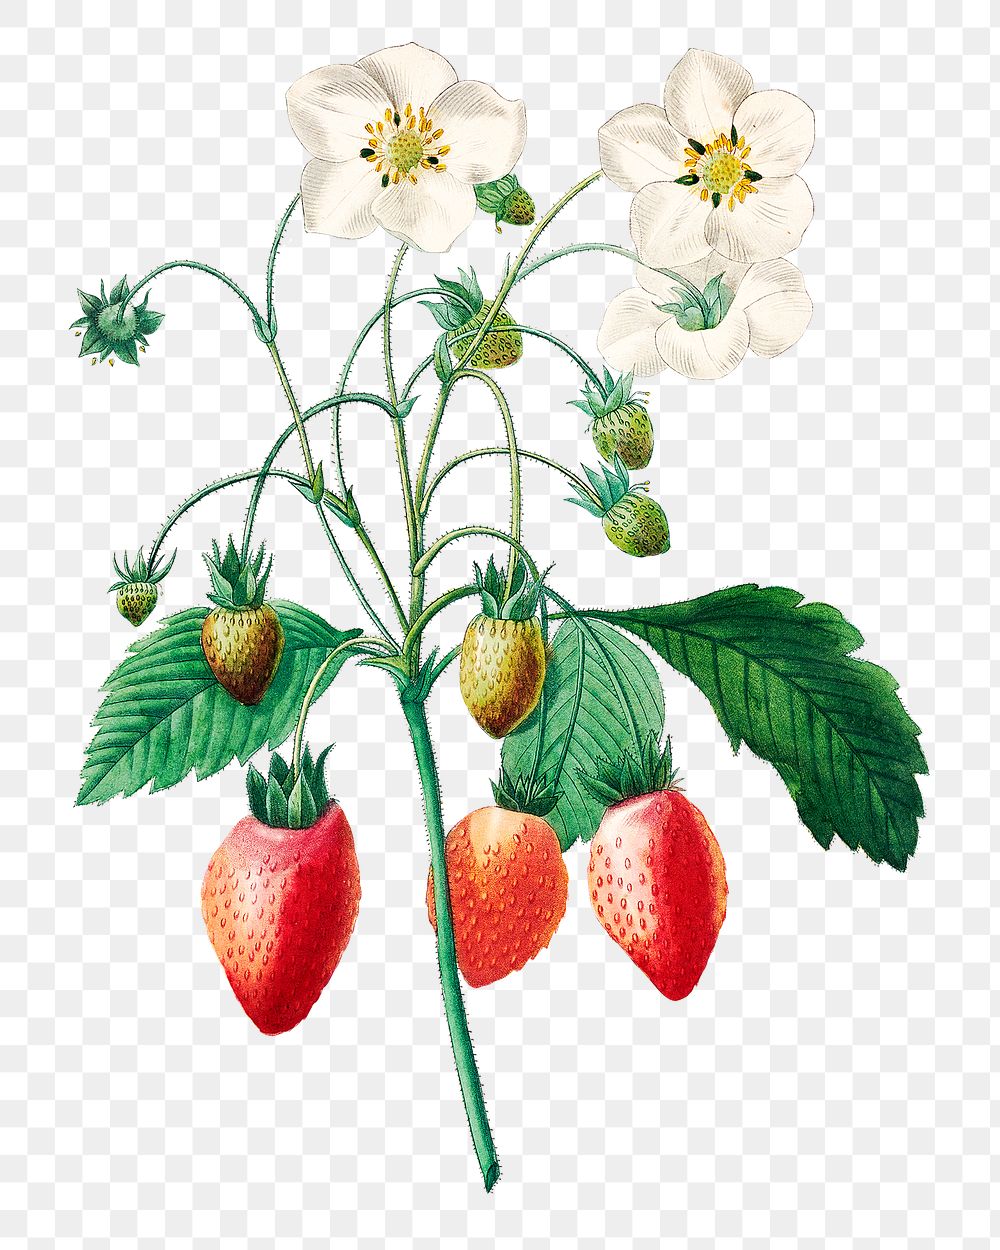 Strawberry fruit png botanical illustration, remixed from artworks by Pierre-Joseph Redout&eacute;